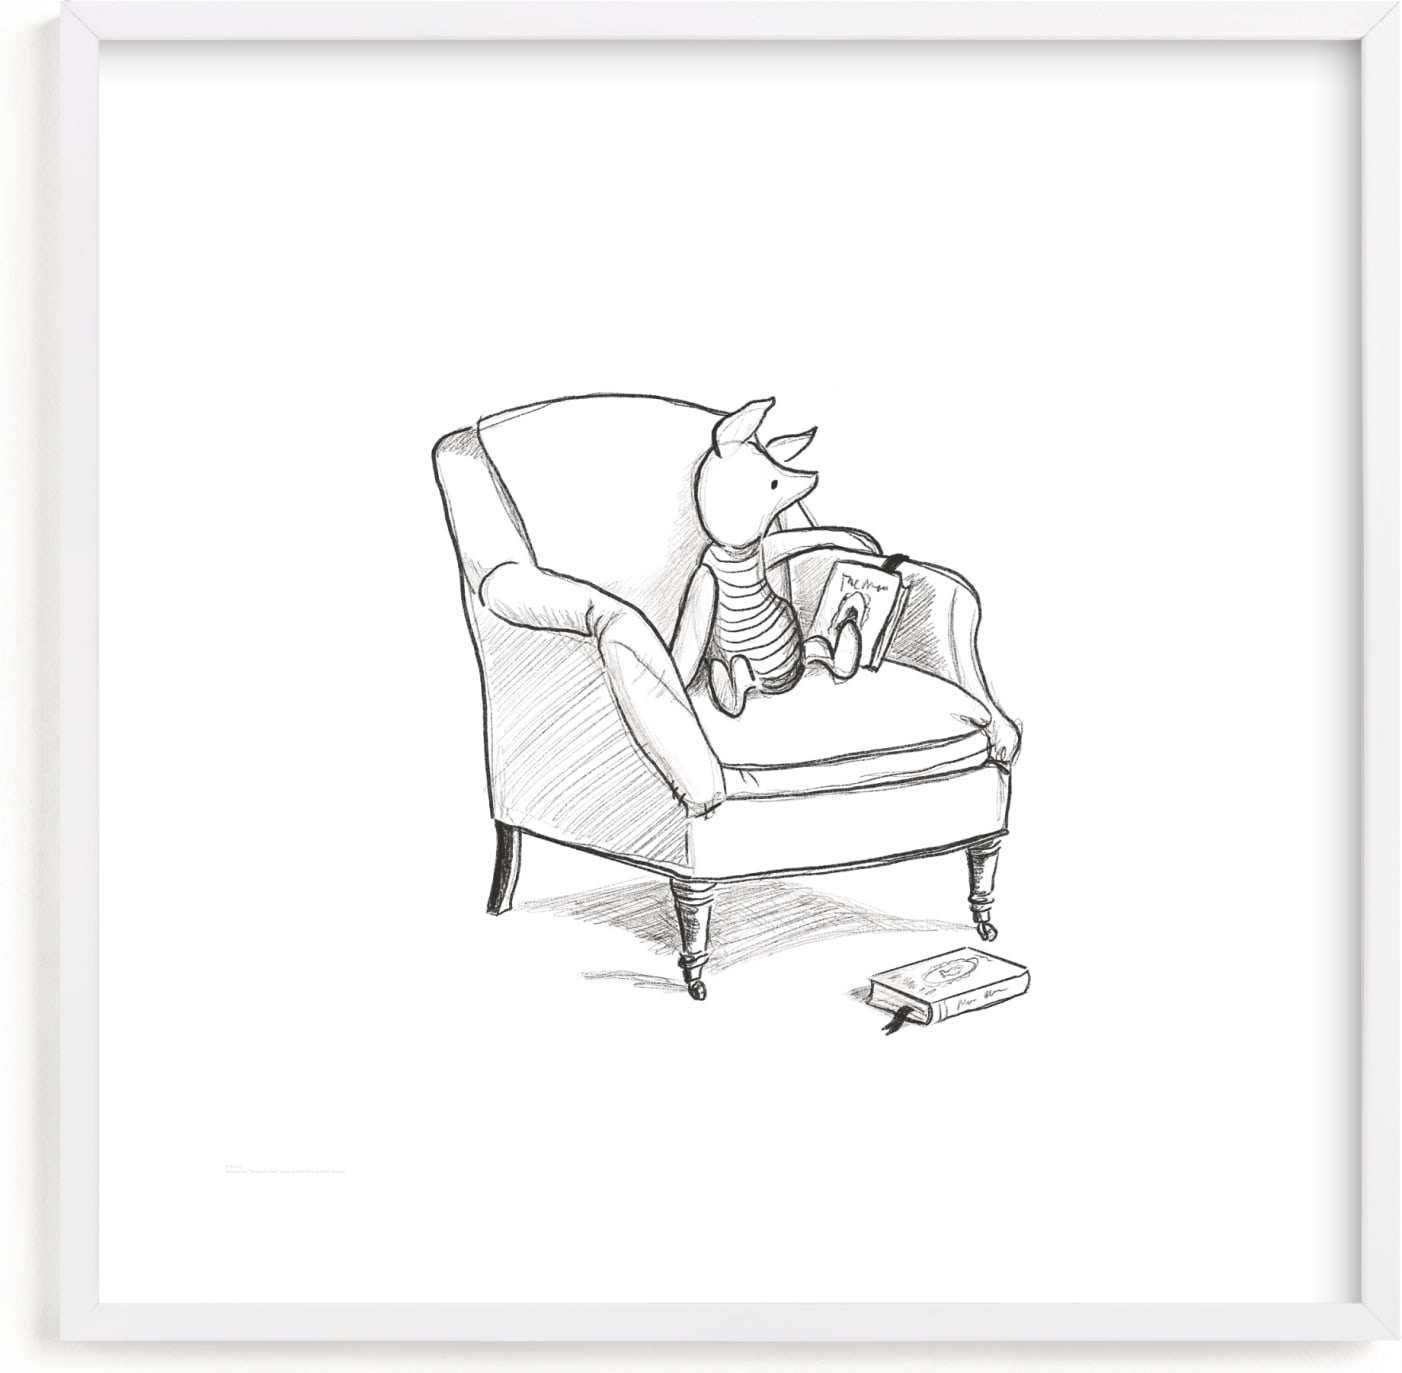 This is a black and white disney art by Stefanie Lane called Piglet Lounging from Disney's Winnie The Pooh.